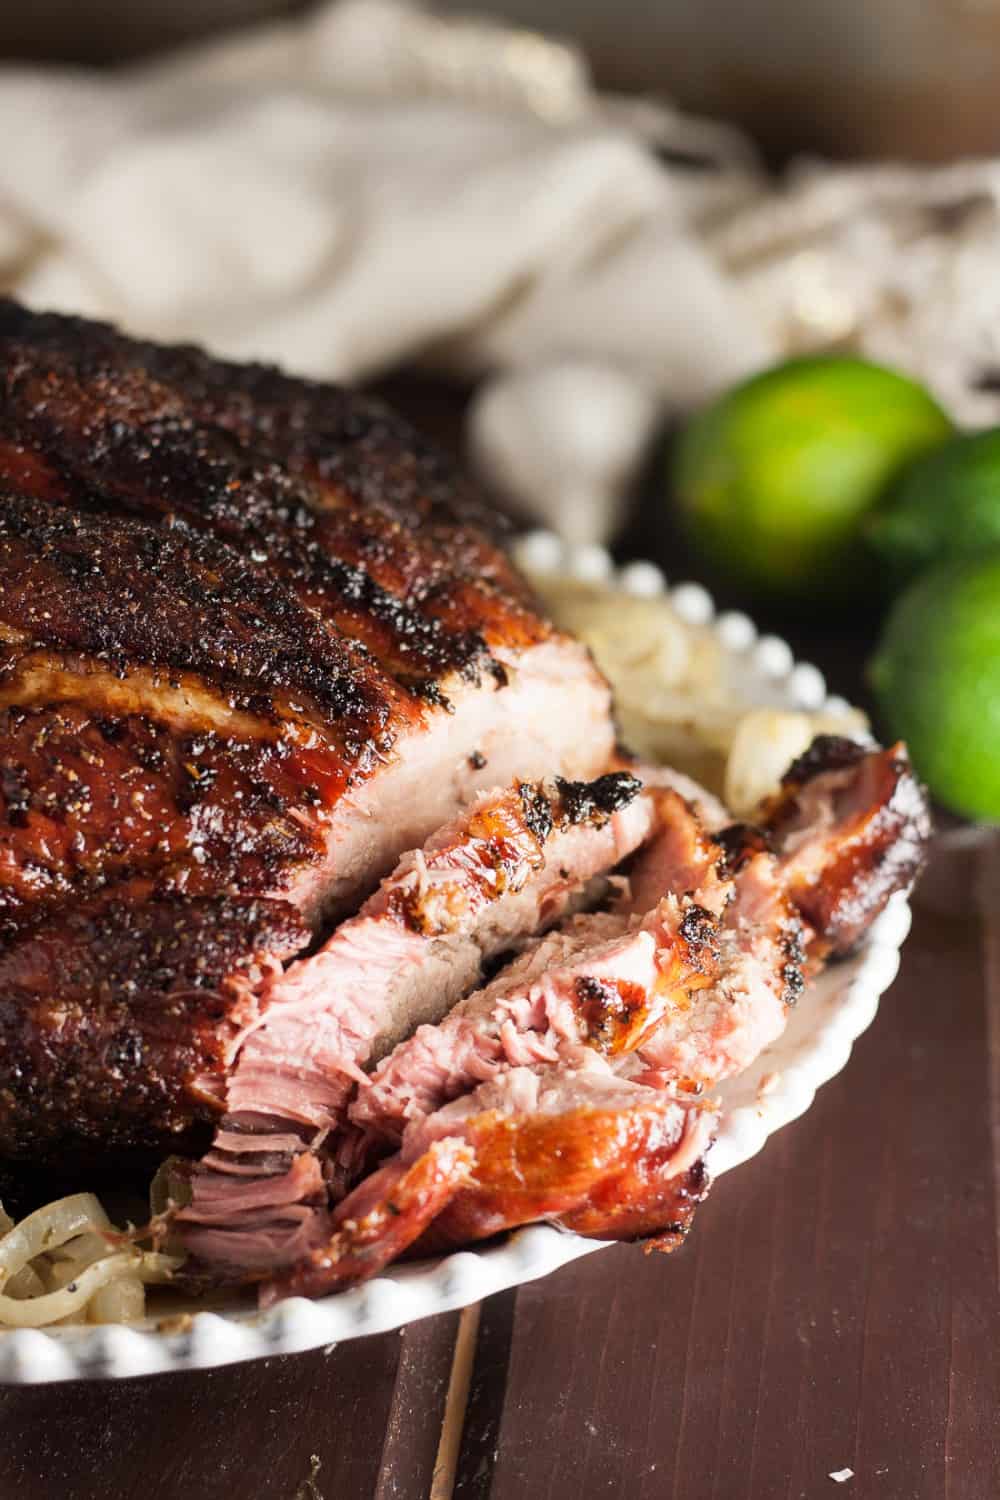 ﻿A traditional Christmas meal in Cuban households, this Cuban pork shoulder recipe is perfect for smaller gatherings! * Recipe on GoodieGodmother.com